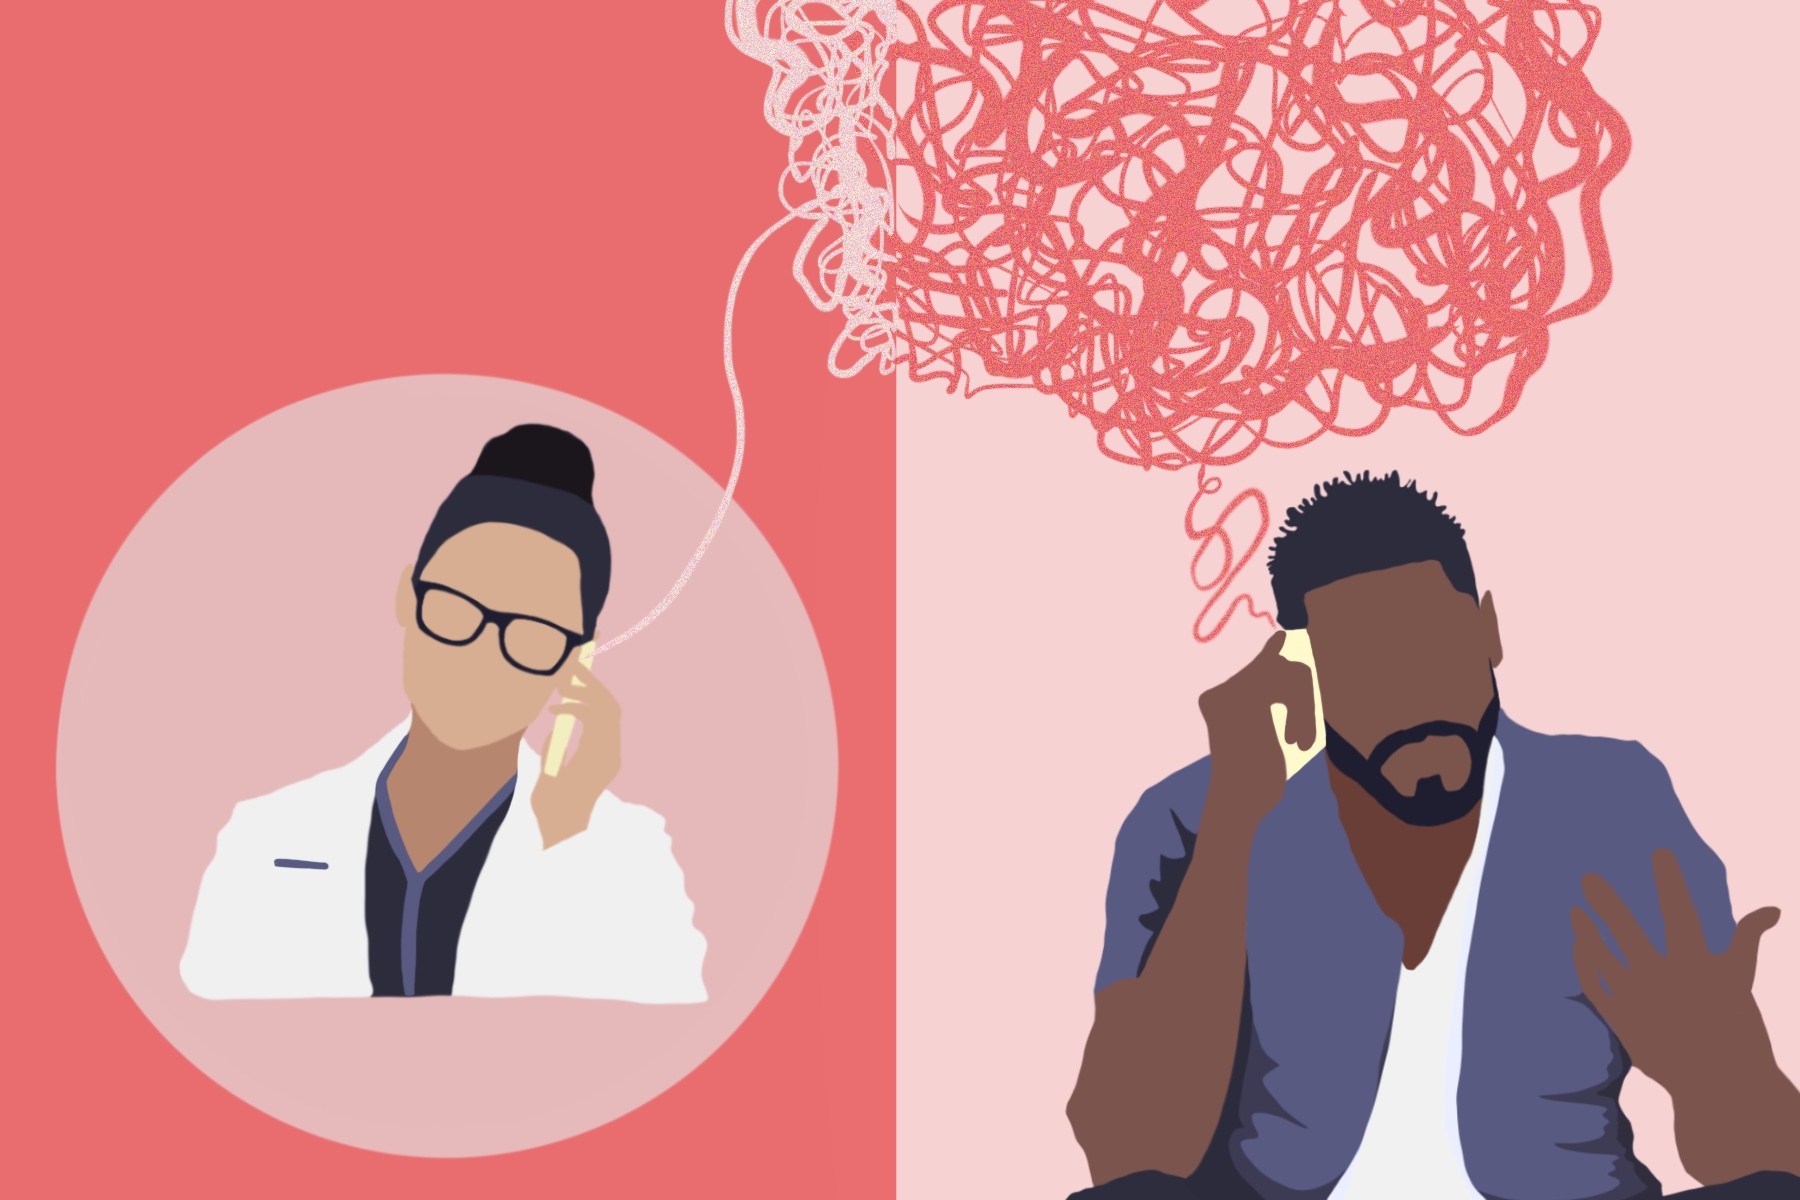 In an article about the app Ray, an illustration by Shelly Freund of two people on the phone